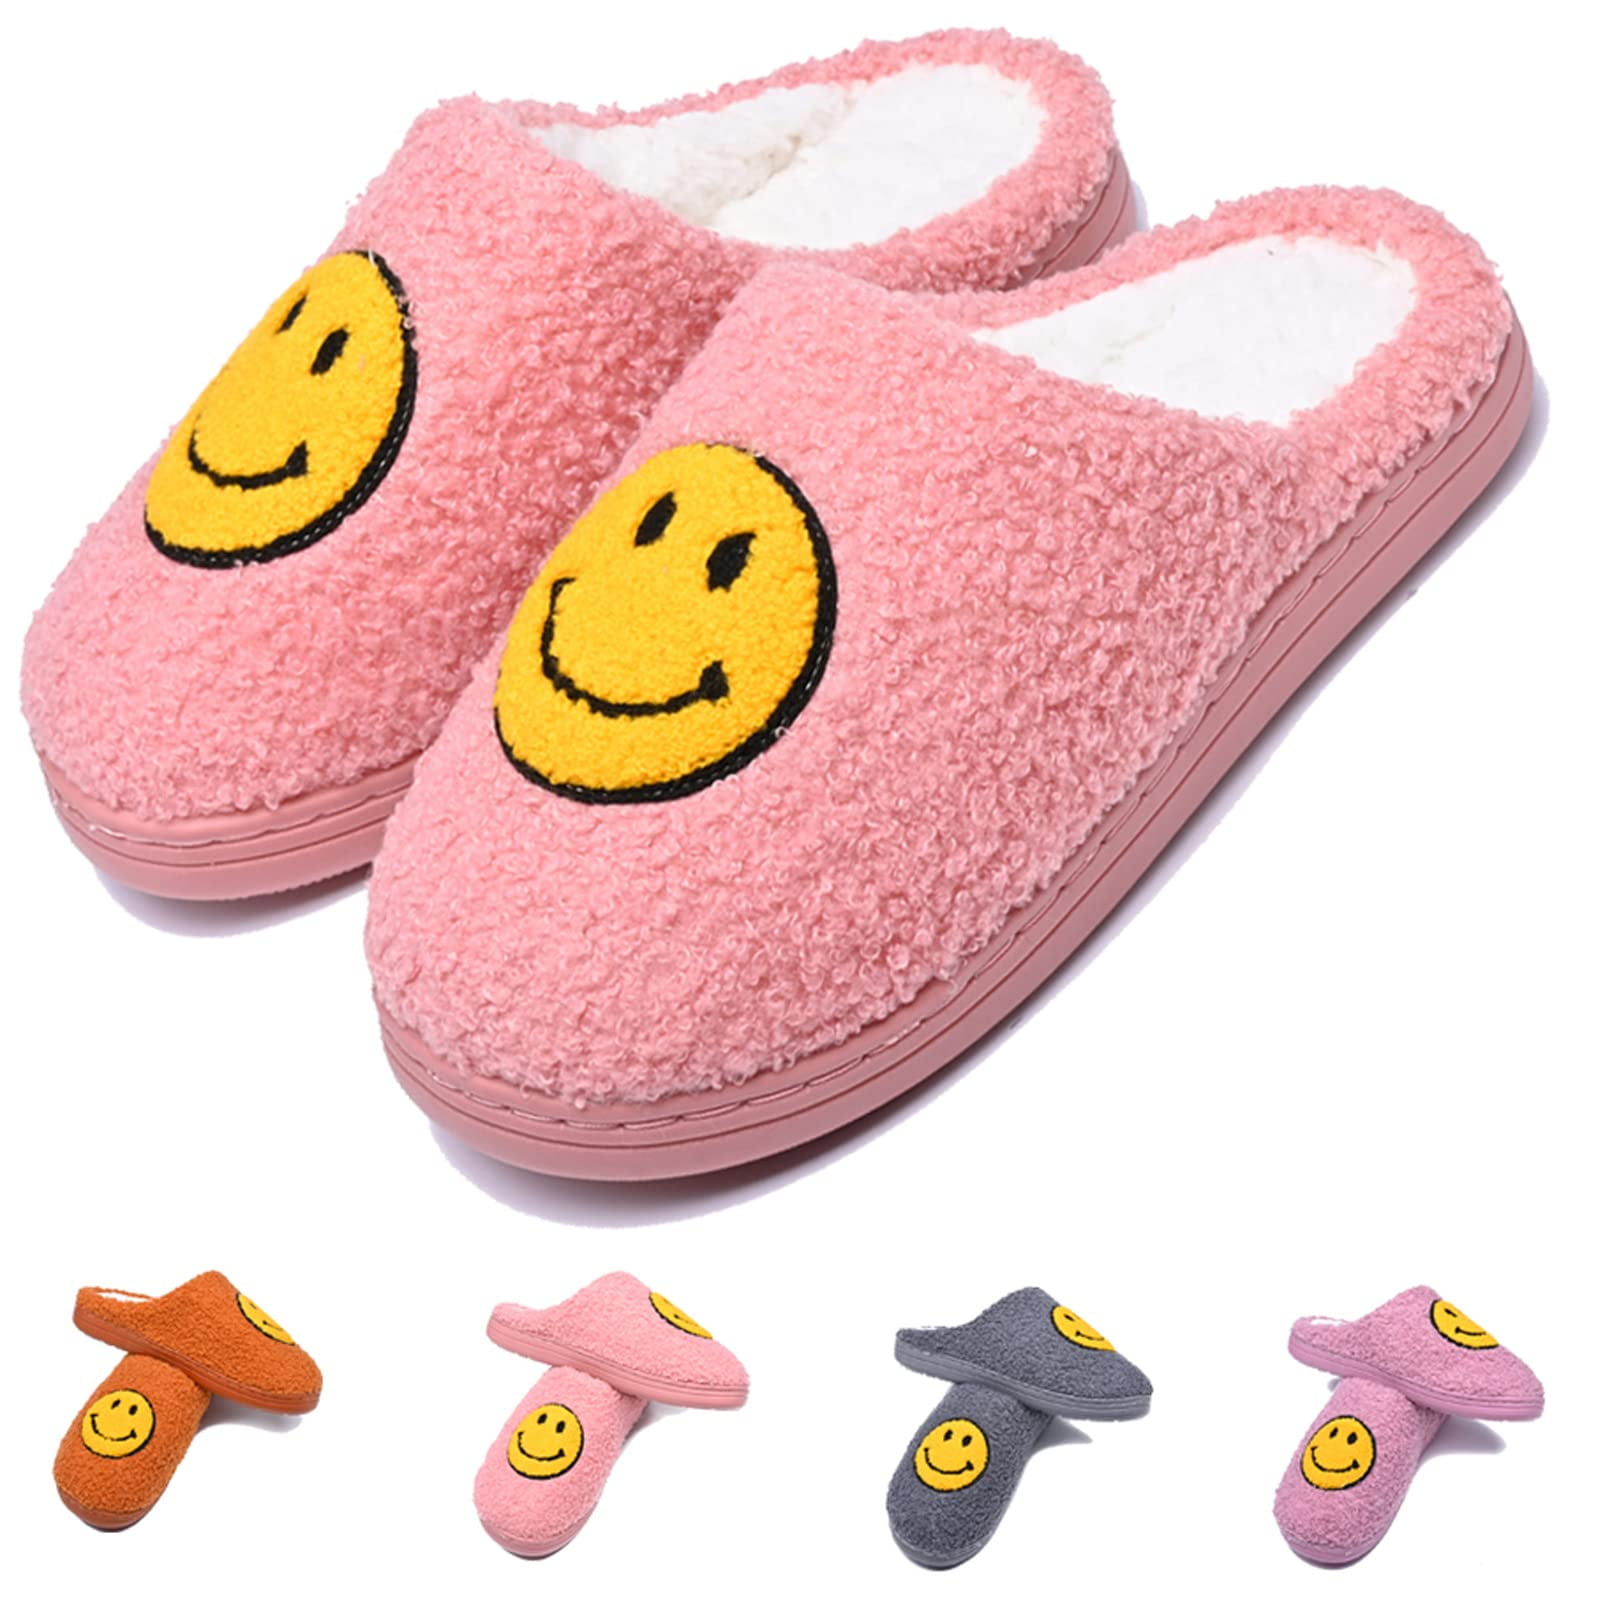 Face Slippers Kids/Children, Soft Plush Comfy Indoor Slippers -